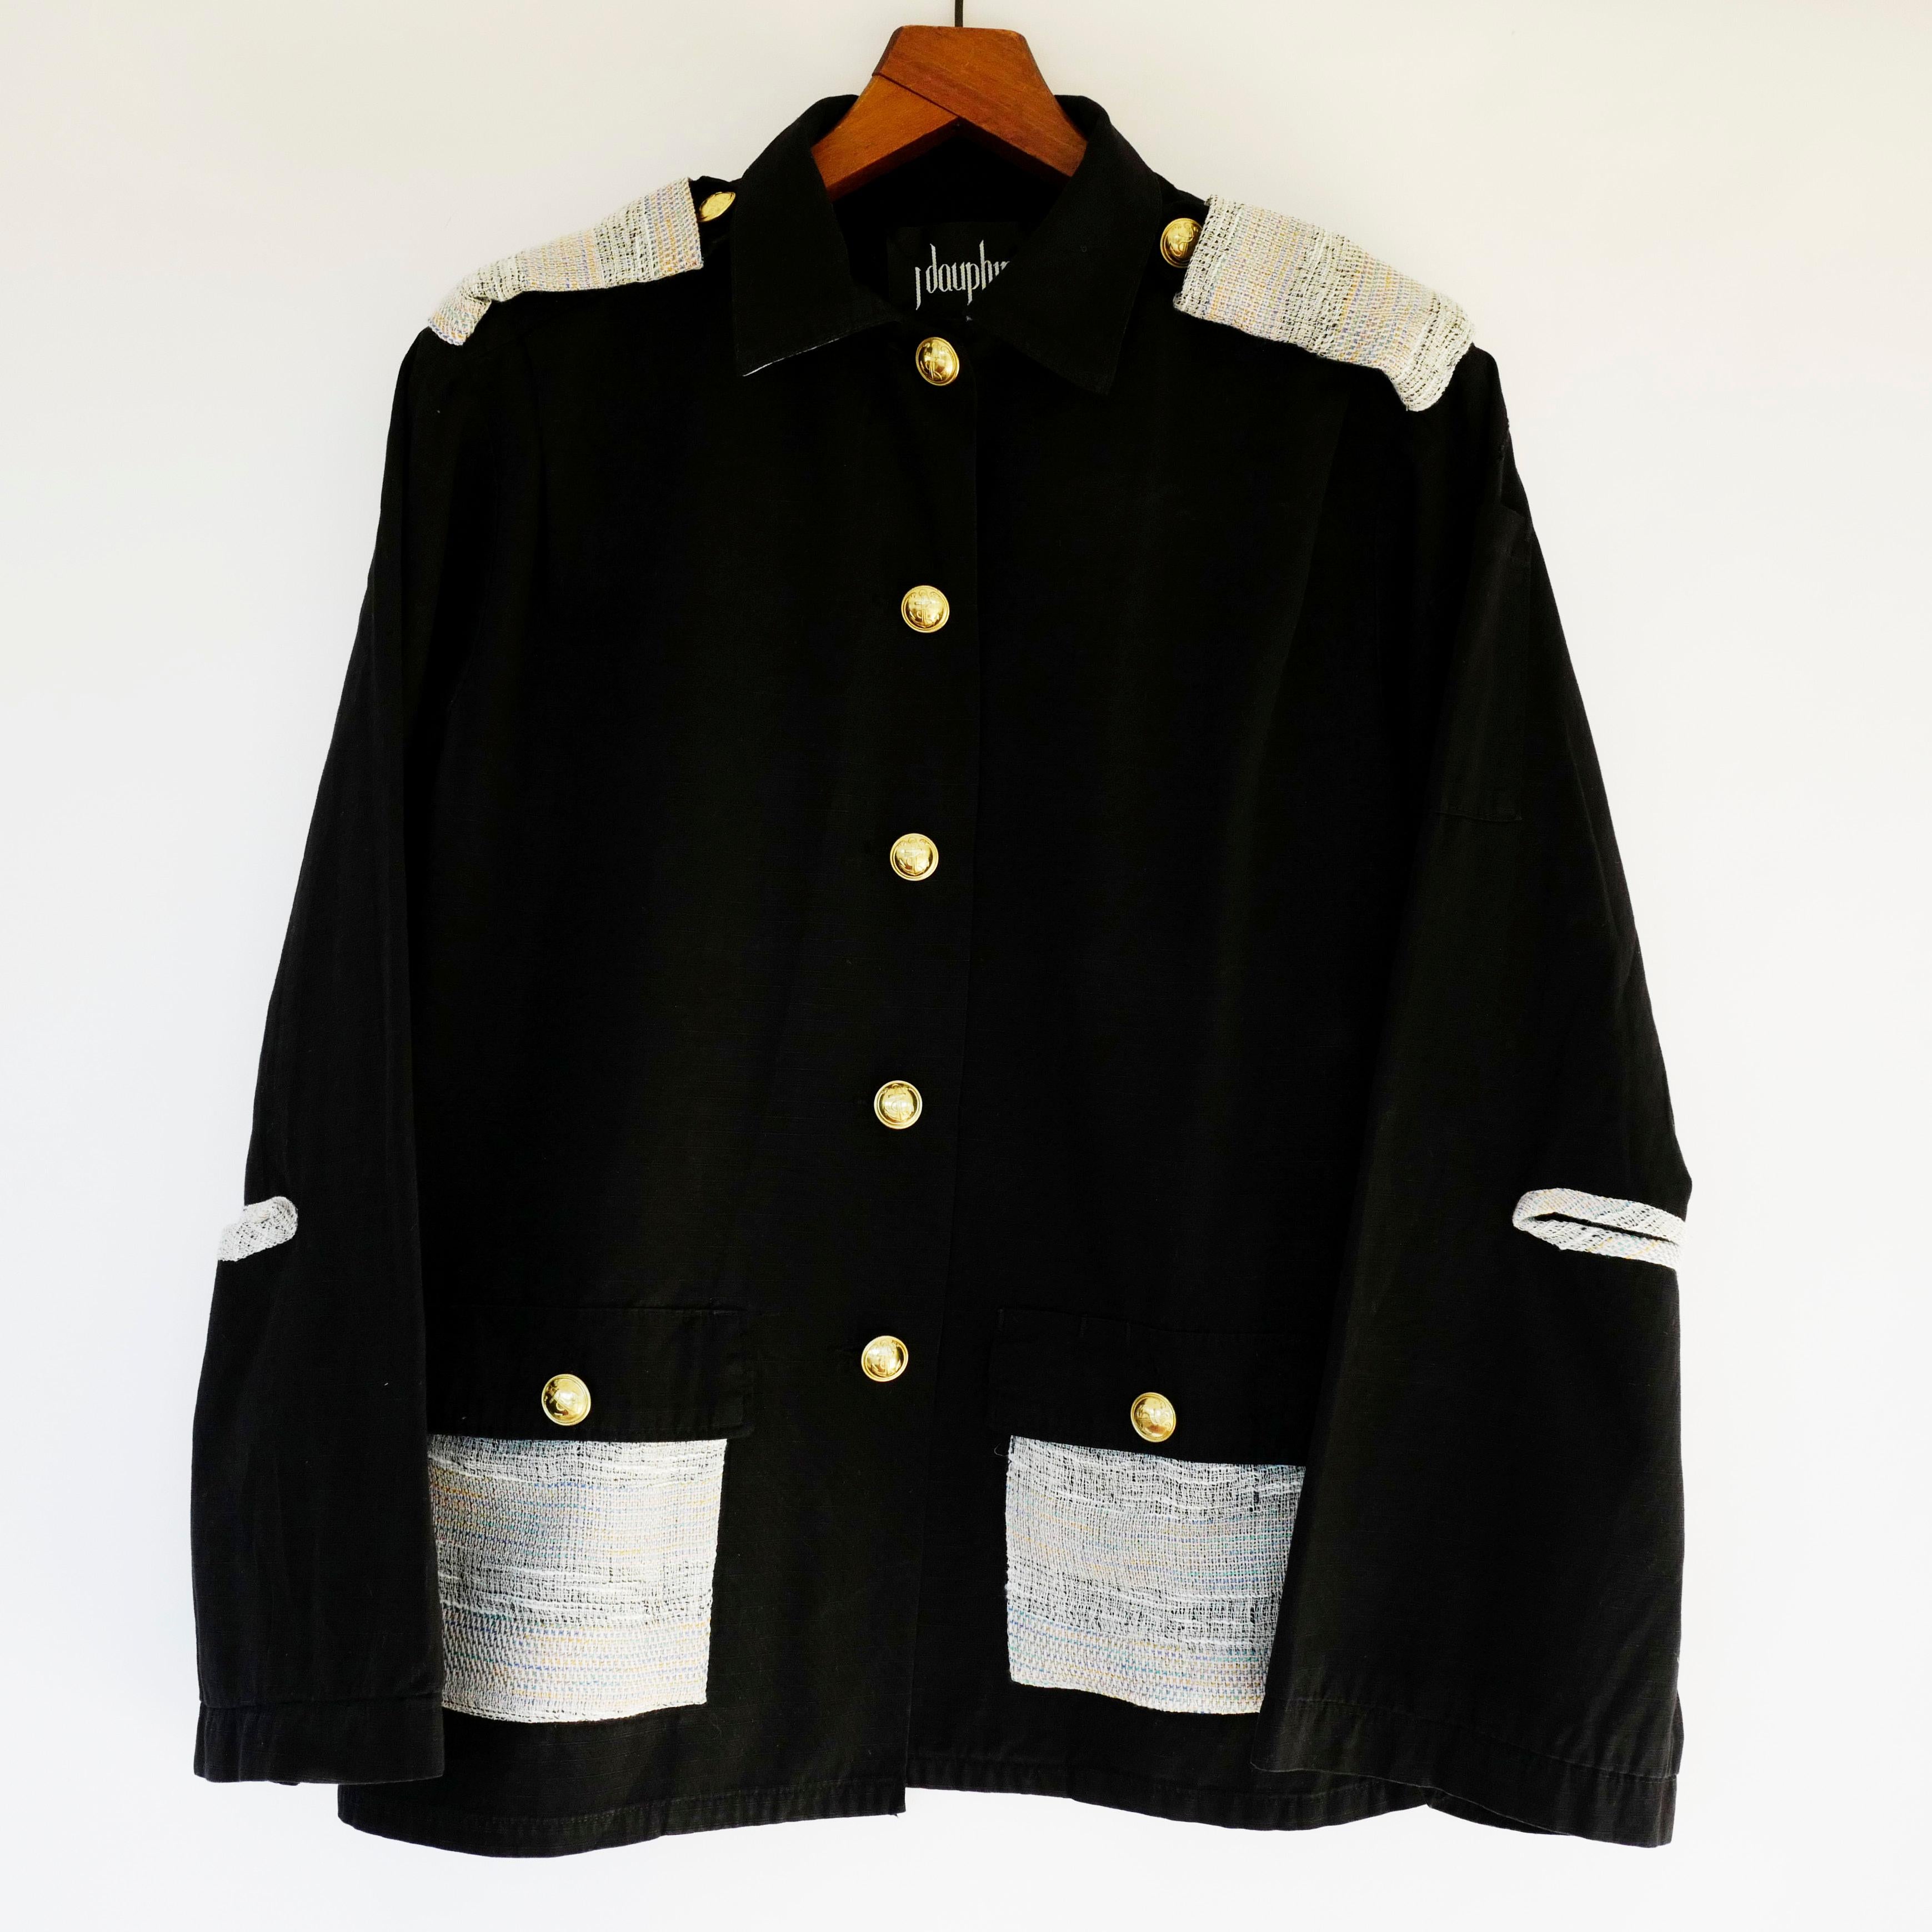 Embellished French Painter Jacket Black, Gold Button Lurex Cotton Tweed Open Elbow J Dauphin, Sustainable Luxury, Up-cycled Vintage

Our Up-cycled Vintage Jackets are made from vintage, natural fibers, military clothing and french workwear from the